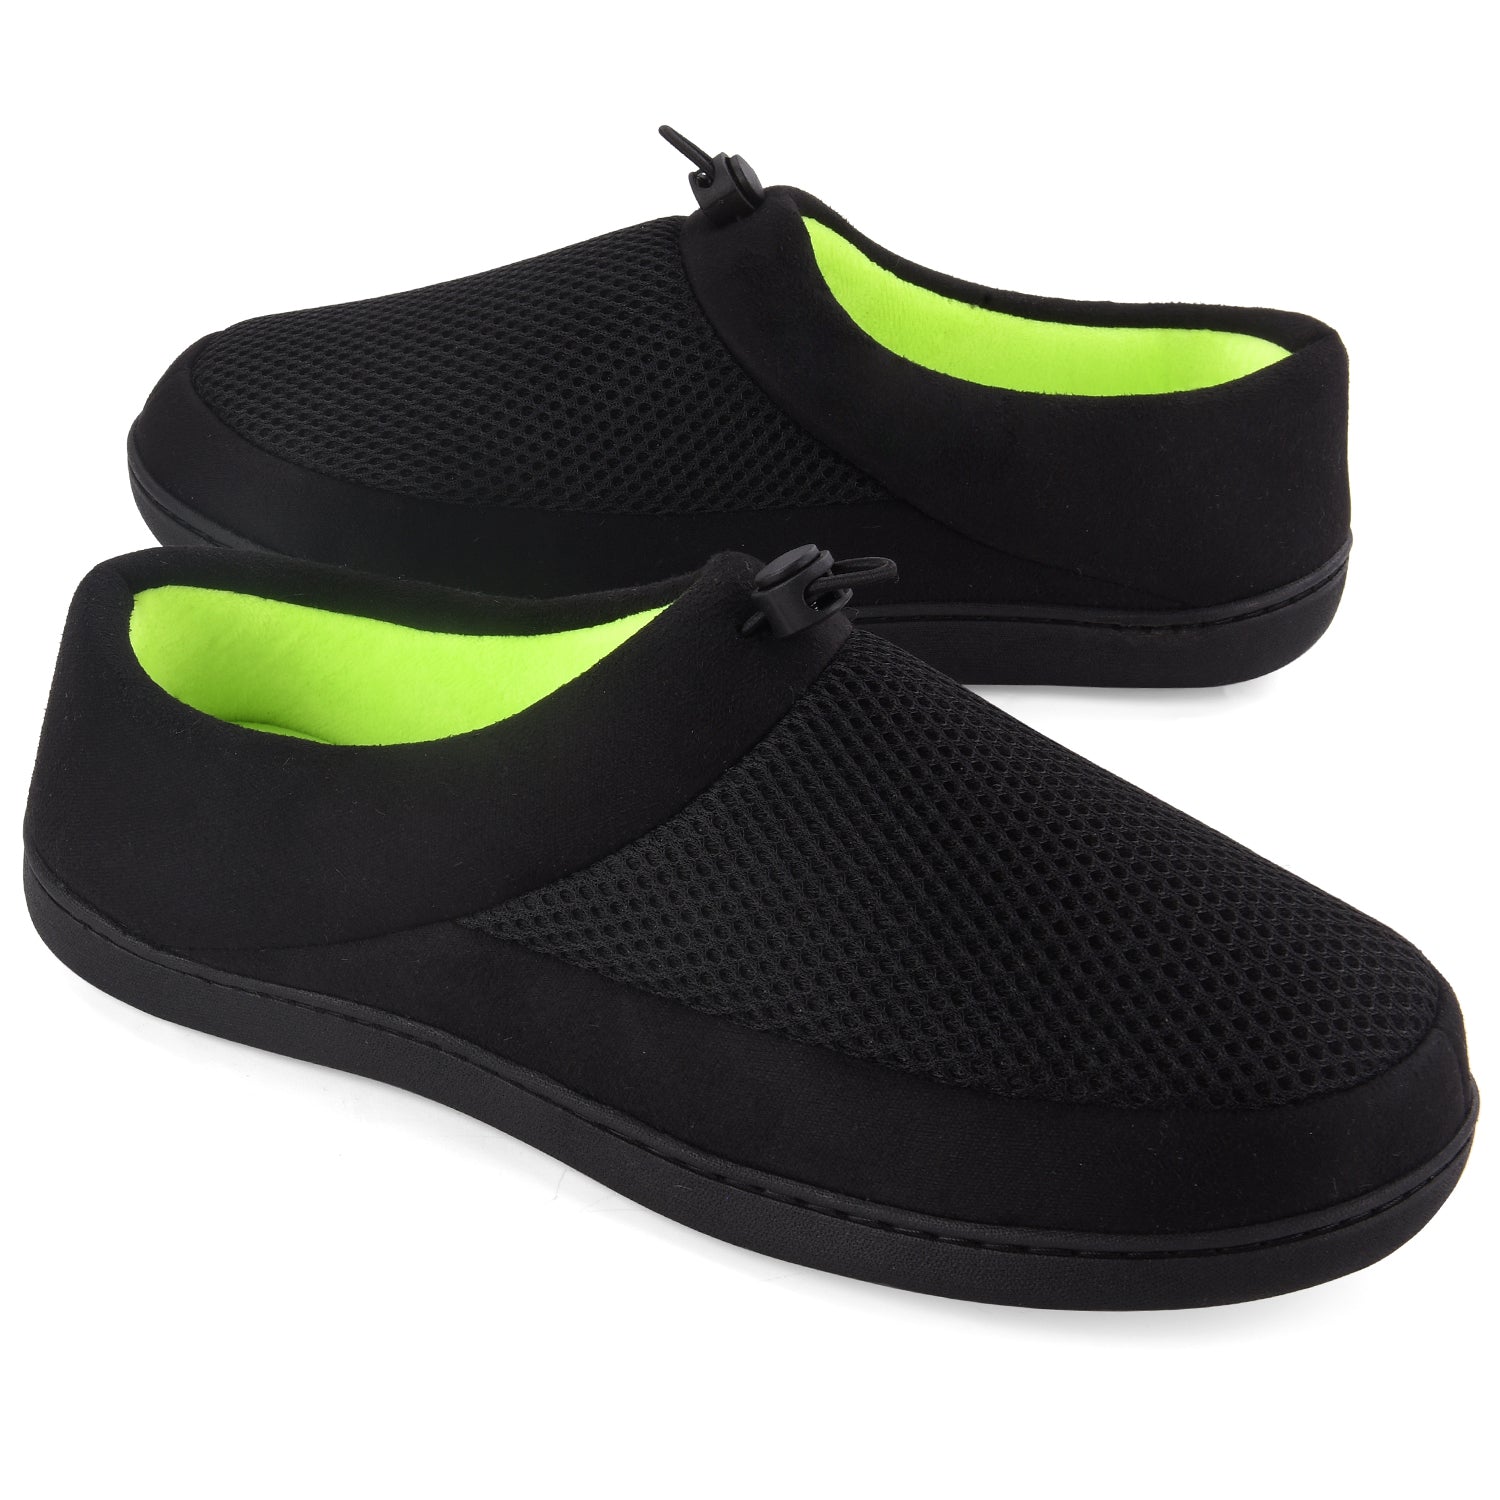 breathable slippers mens